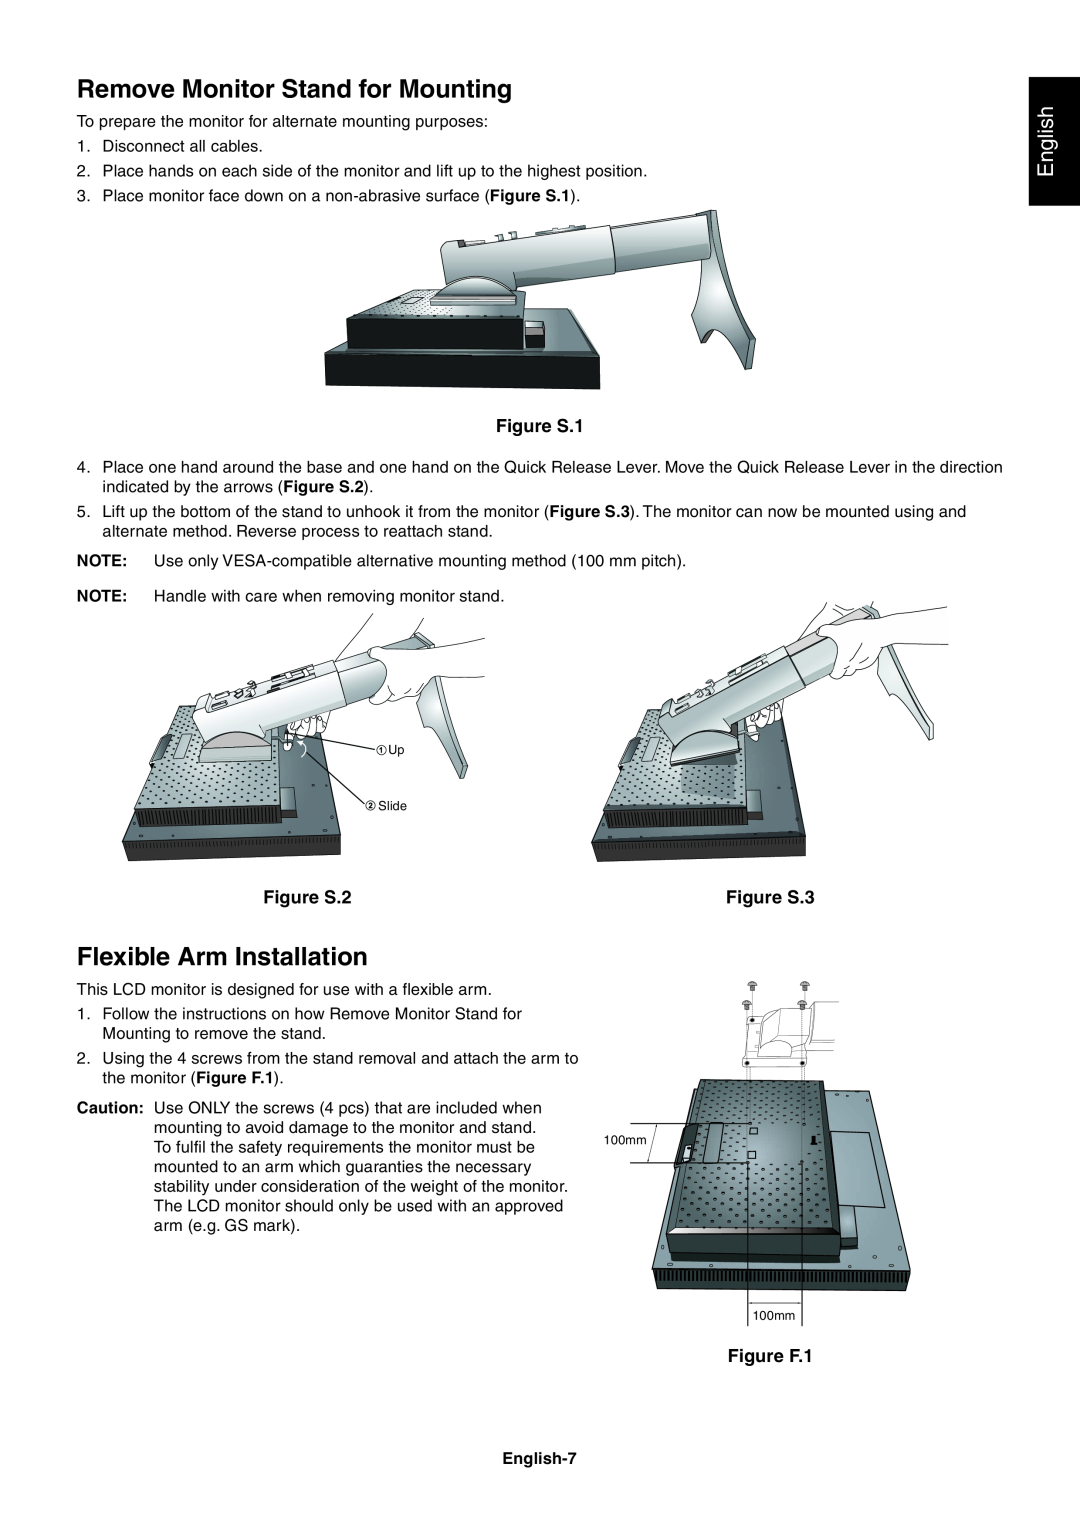 NEC LCD2090UXI Remove Monitor Stand for Mounting, Flexible Arm Installation, English, Figure S.1, Figure S.2, Figure S.3 